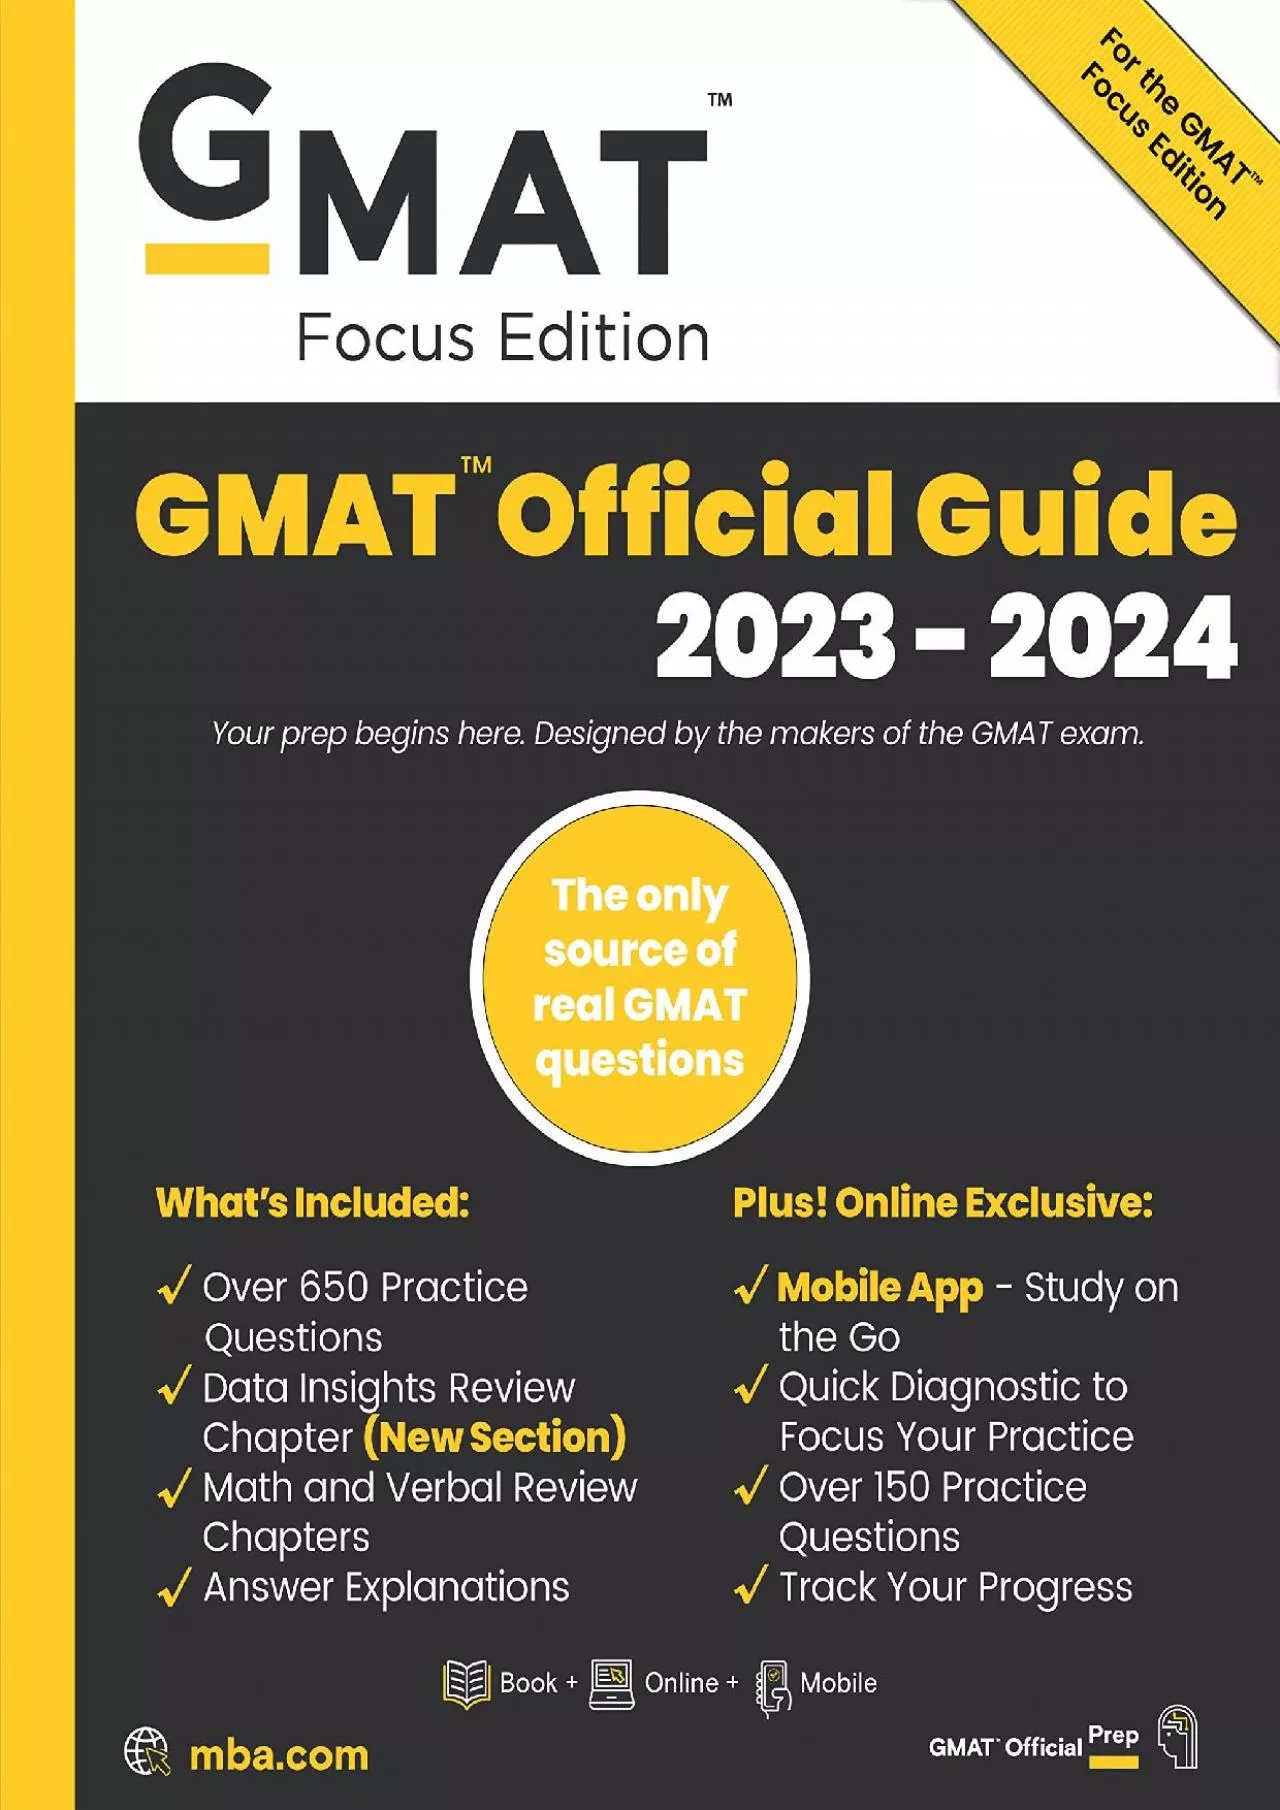 [READ] GMAT Official Guide 2023-2024, Focus Edition: Includes Book + Online Question Bank